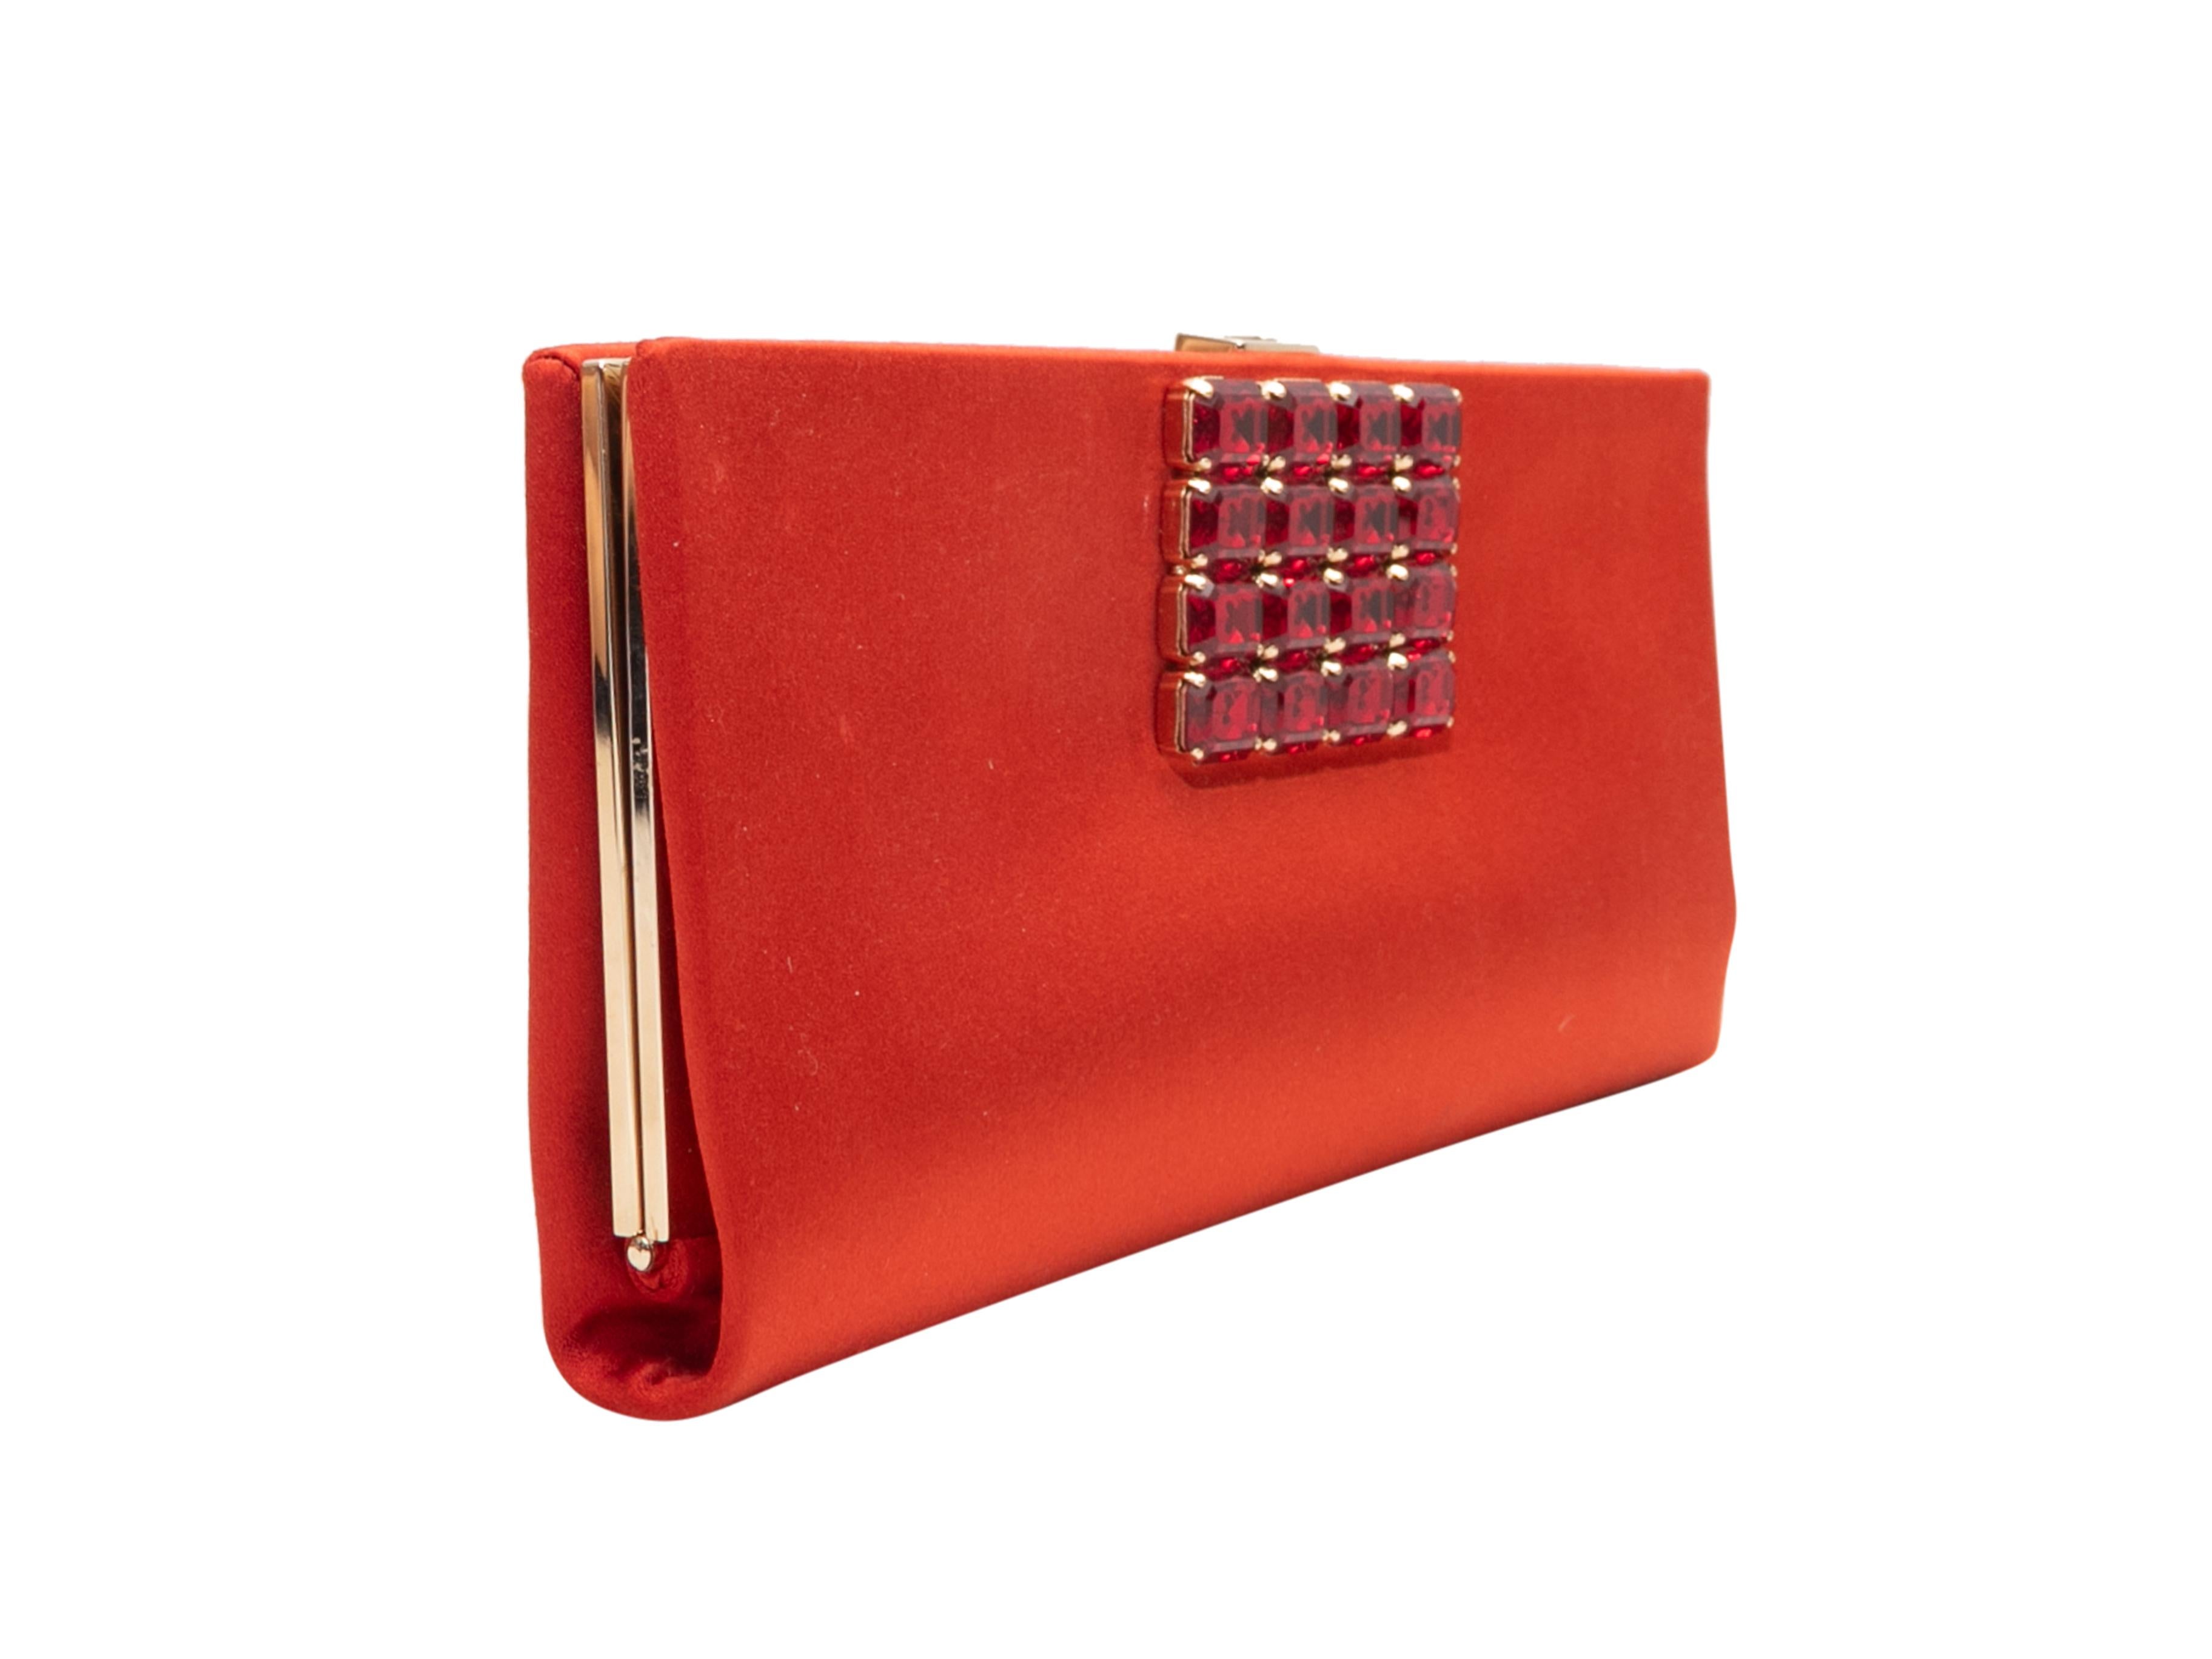 Red Roger Vivier Satin Clutch In Good Condition For Sale In New York, NY